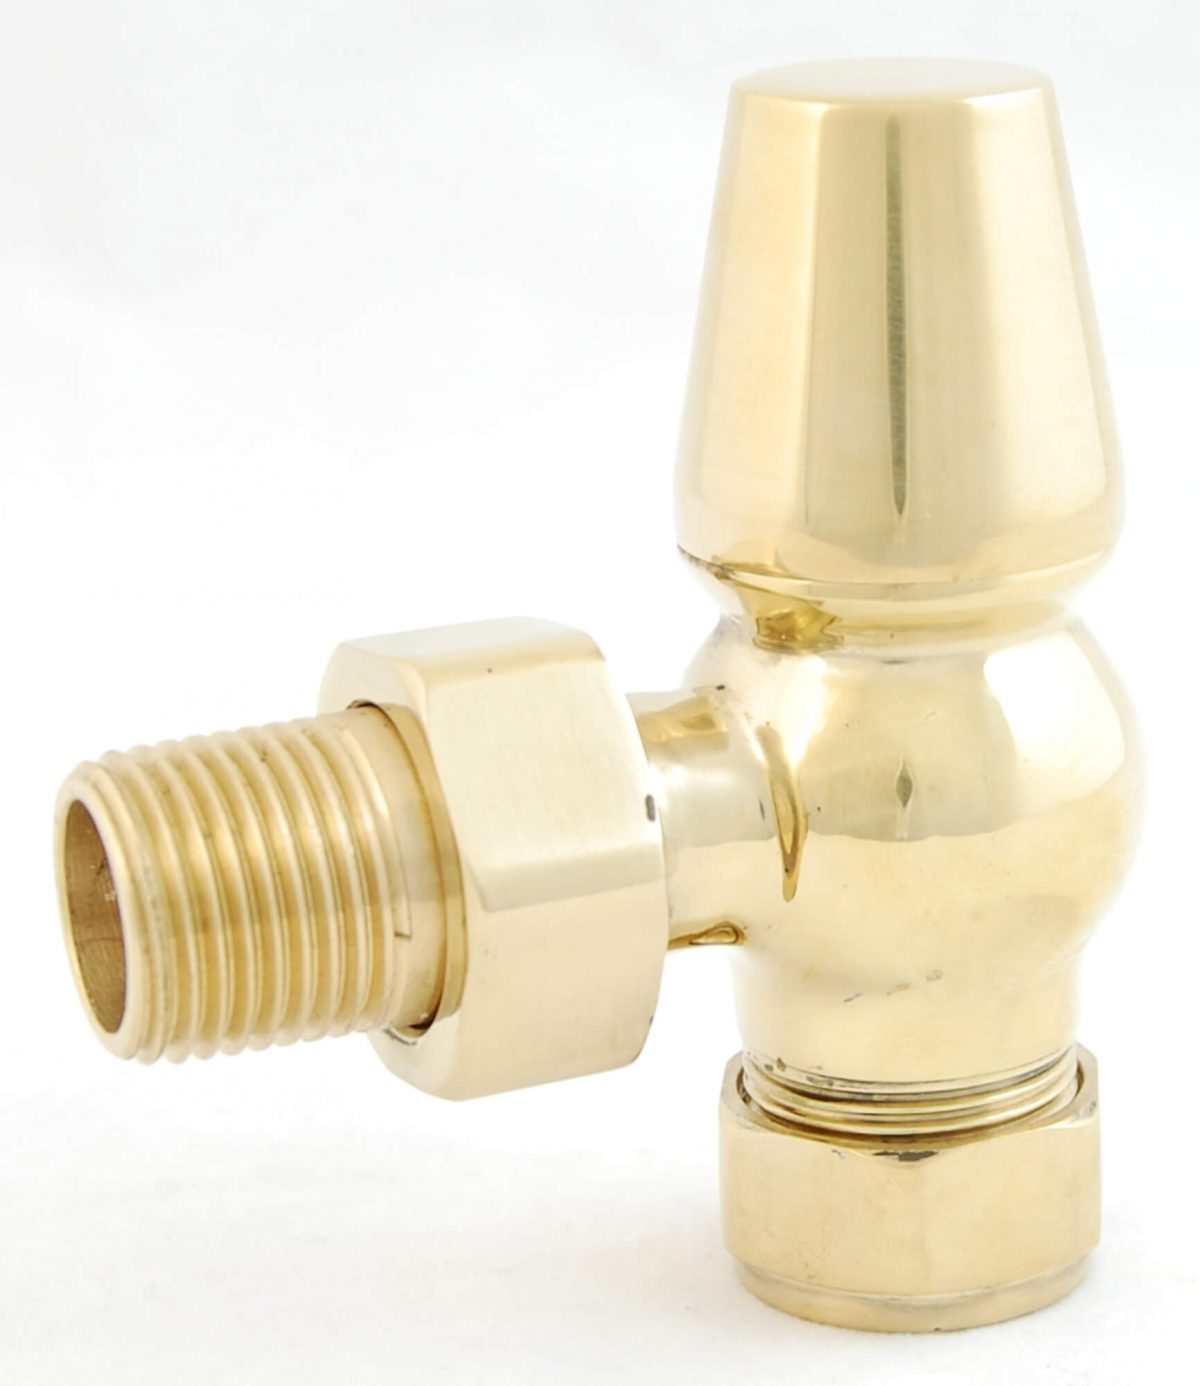 Faringdon Traditional Thermostatic Radiator Valve - Un-Lacquered Brass (Angled TRV)